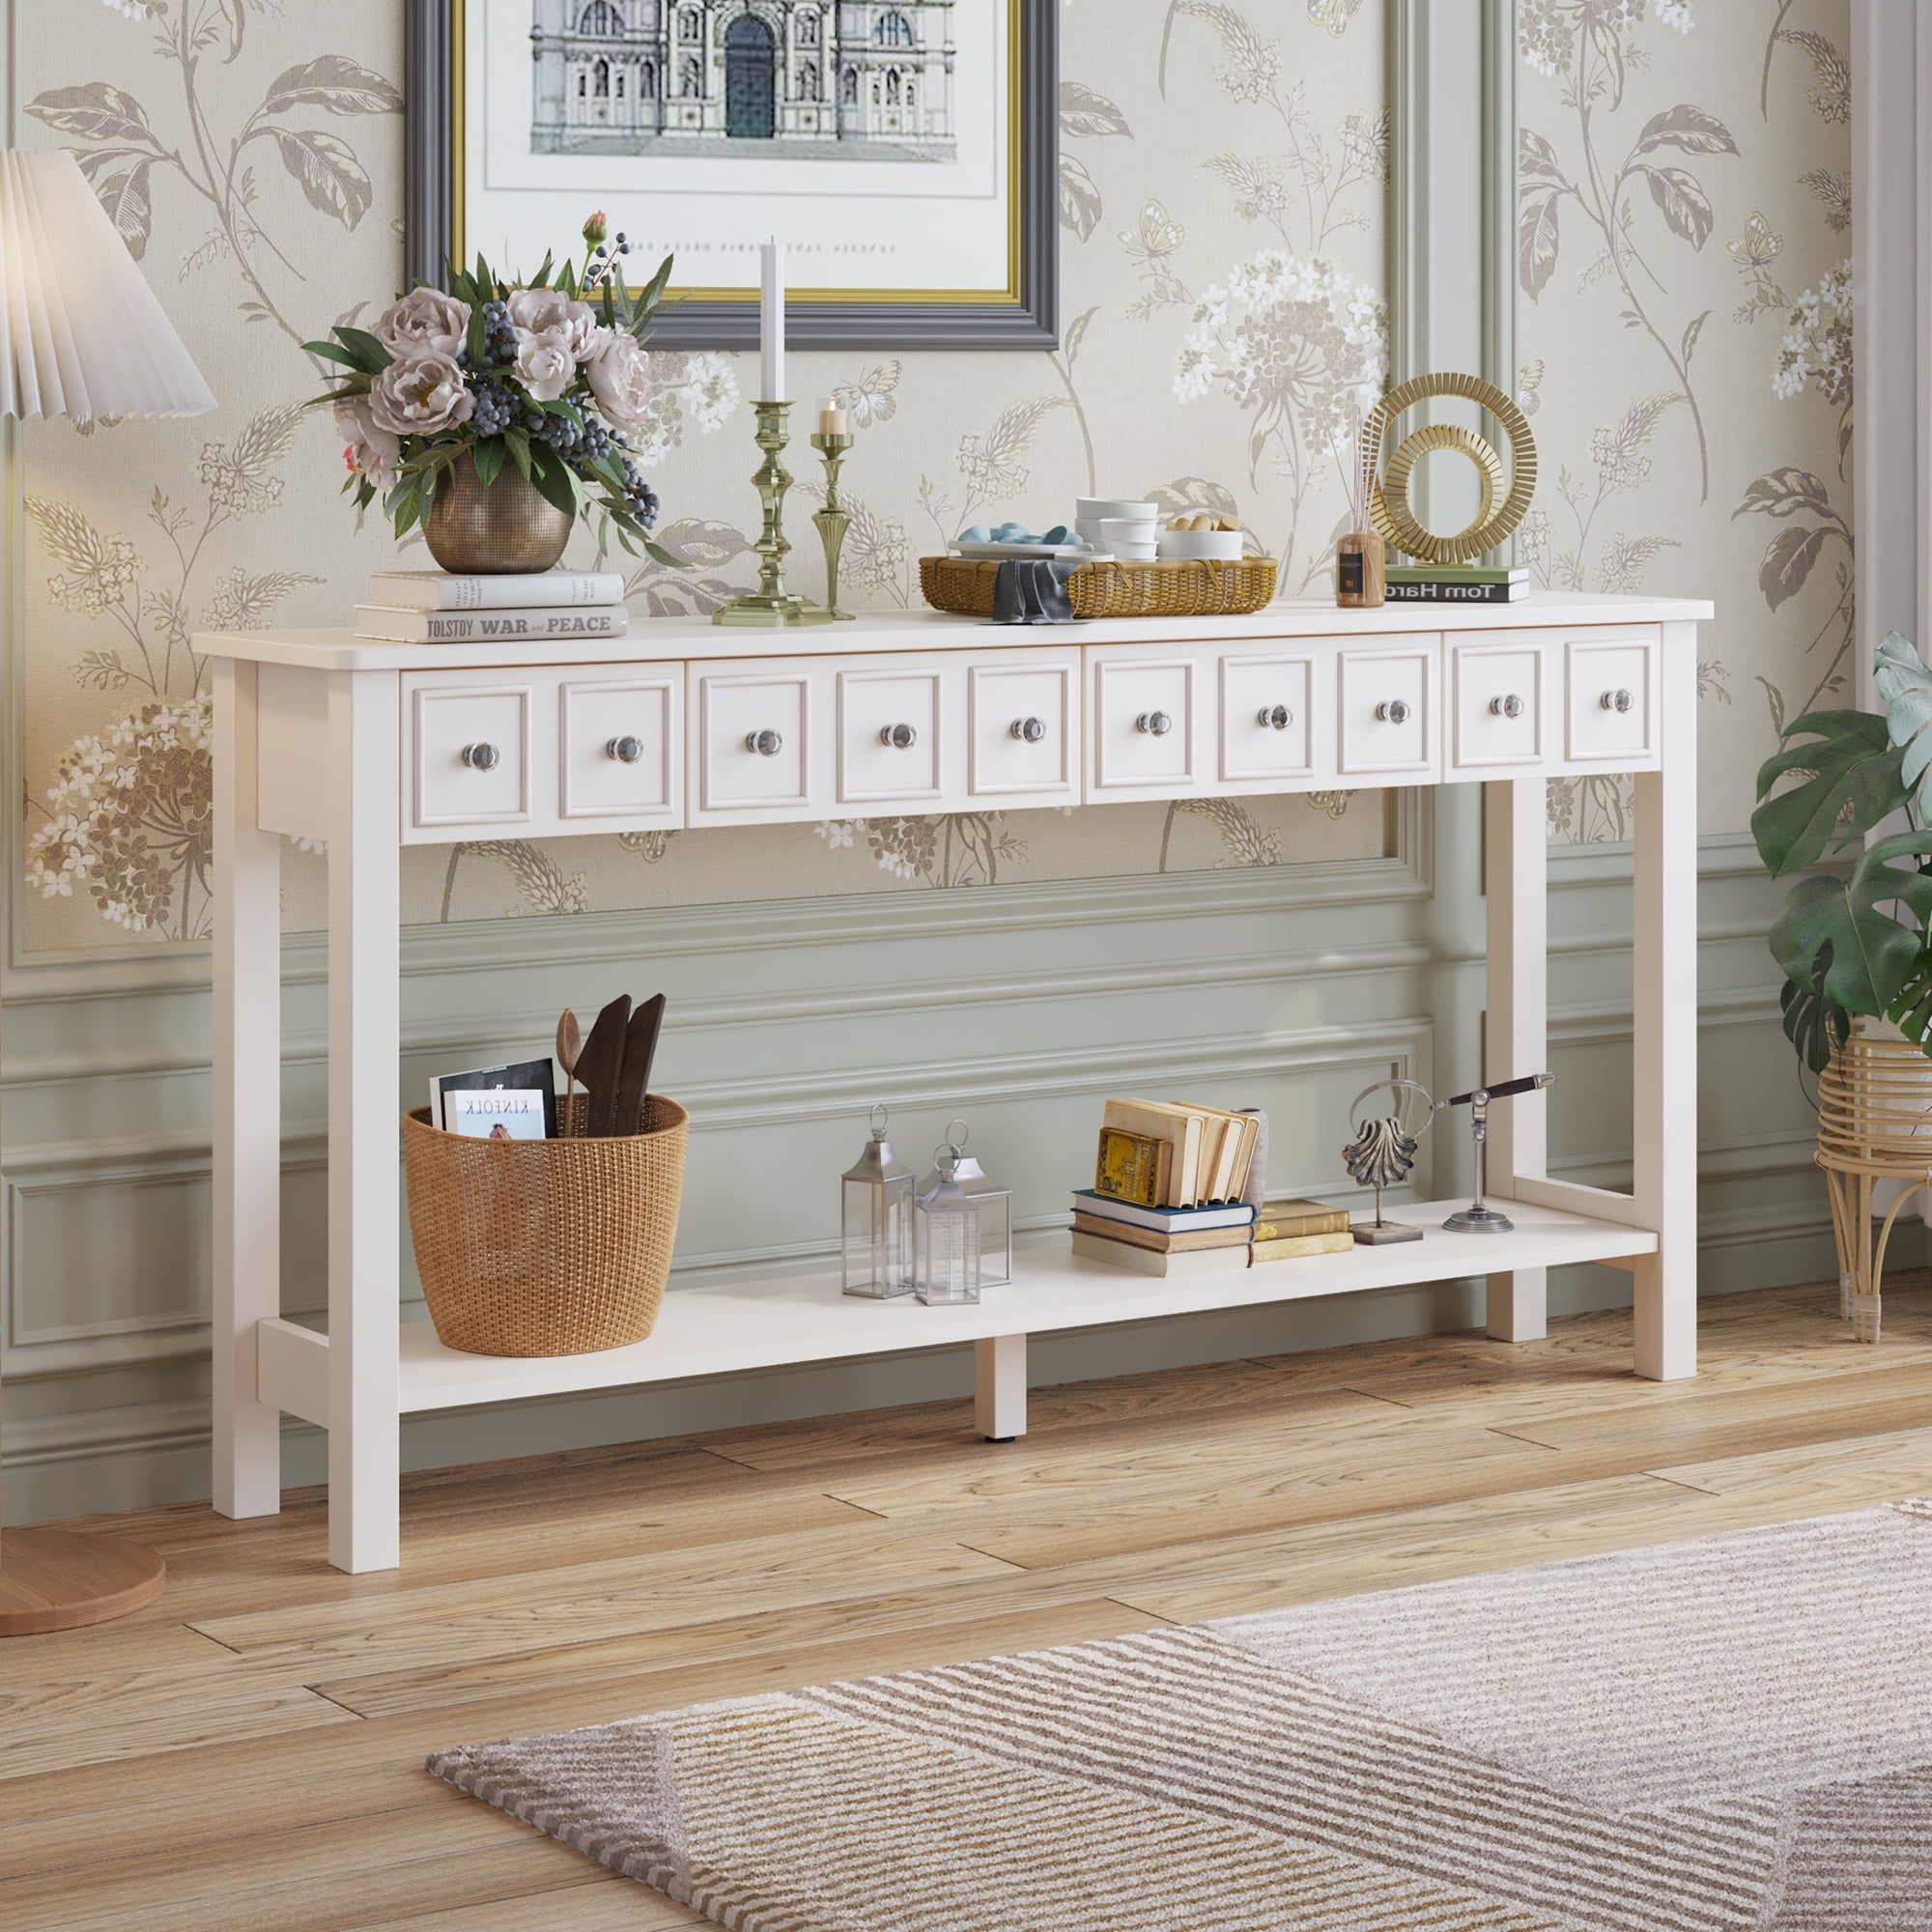 Sideboards Cupboard Console Table In Most Popular Console Sofa Table With 4 Drawers, 58'' Wood Buffet Sideboard Desk W/bottom  Shelf, Retro Tall Entryway Table W/ Mdf Panel For Kitchen Dining Room  Cupboard, 144lbs, Ivory White, Ss1202 – Walmart (View 6 of 15)